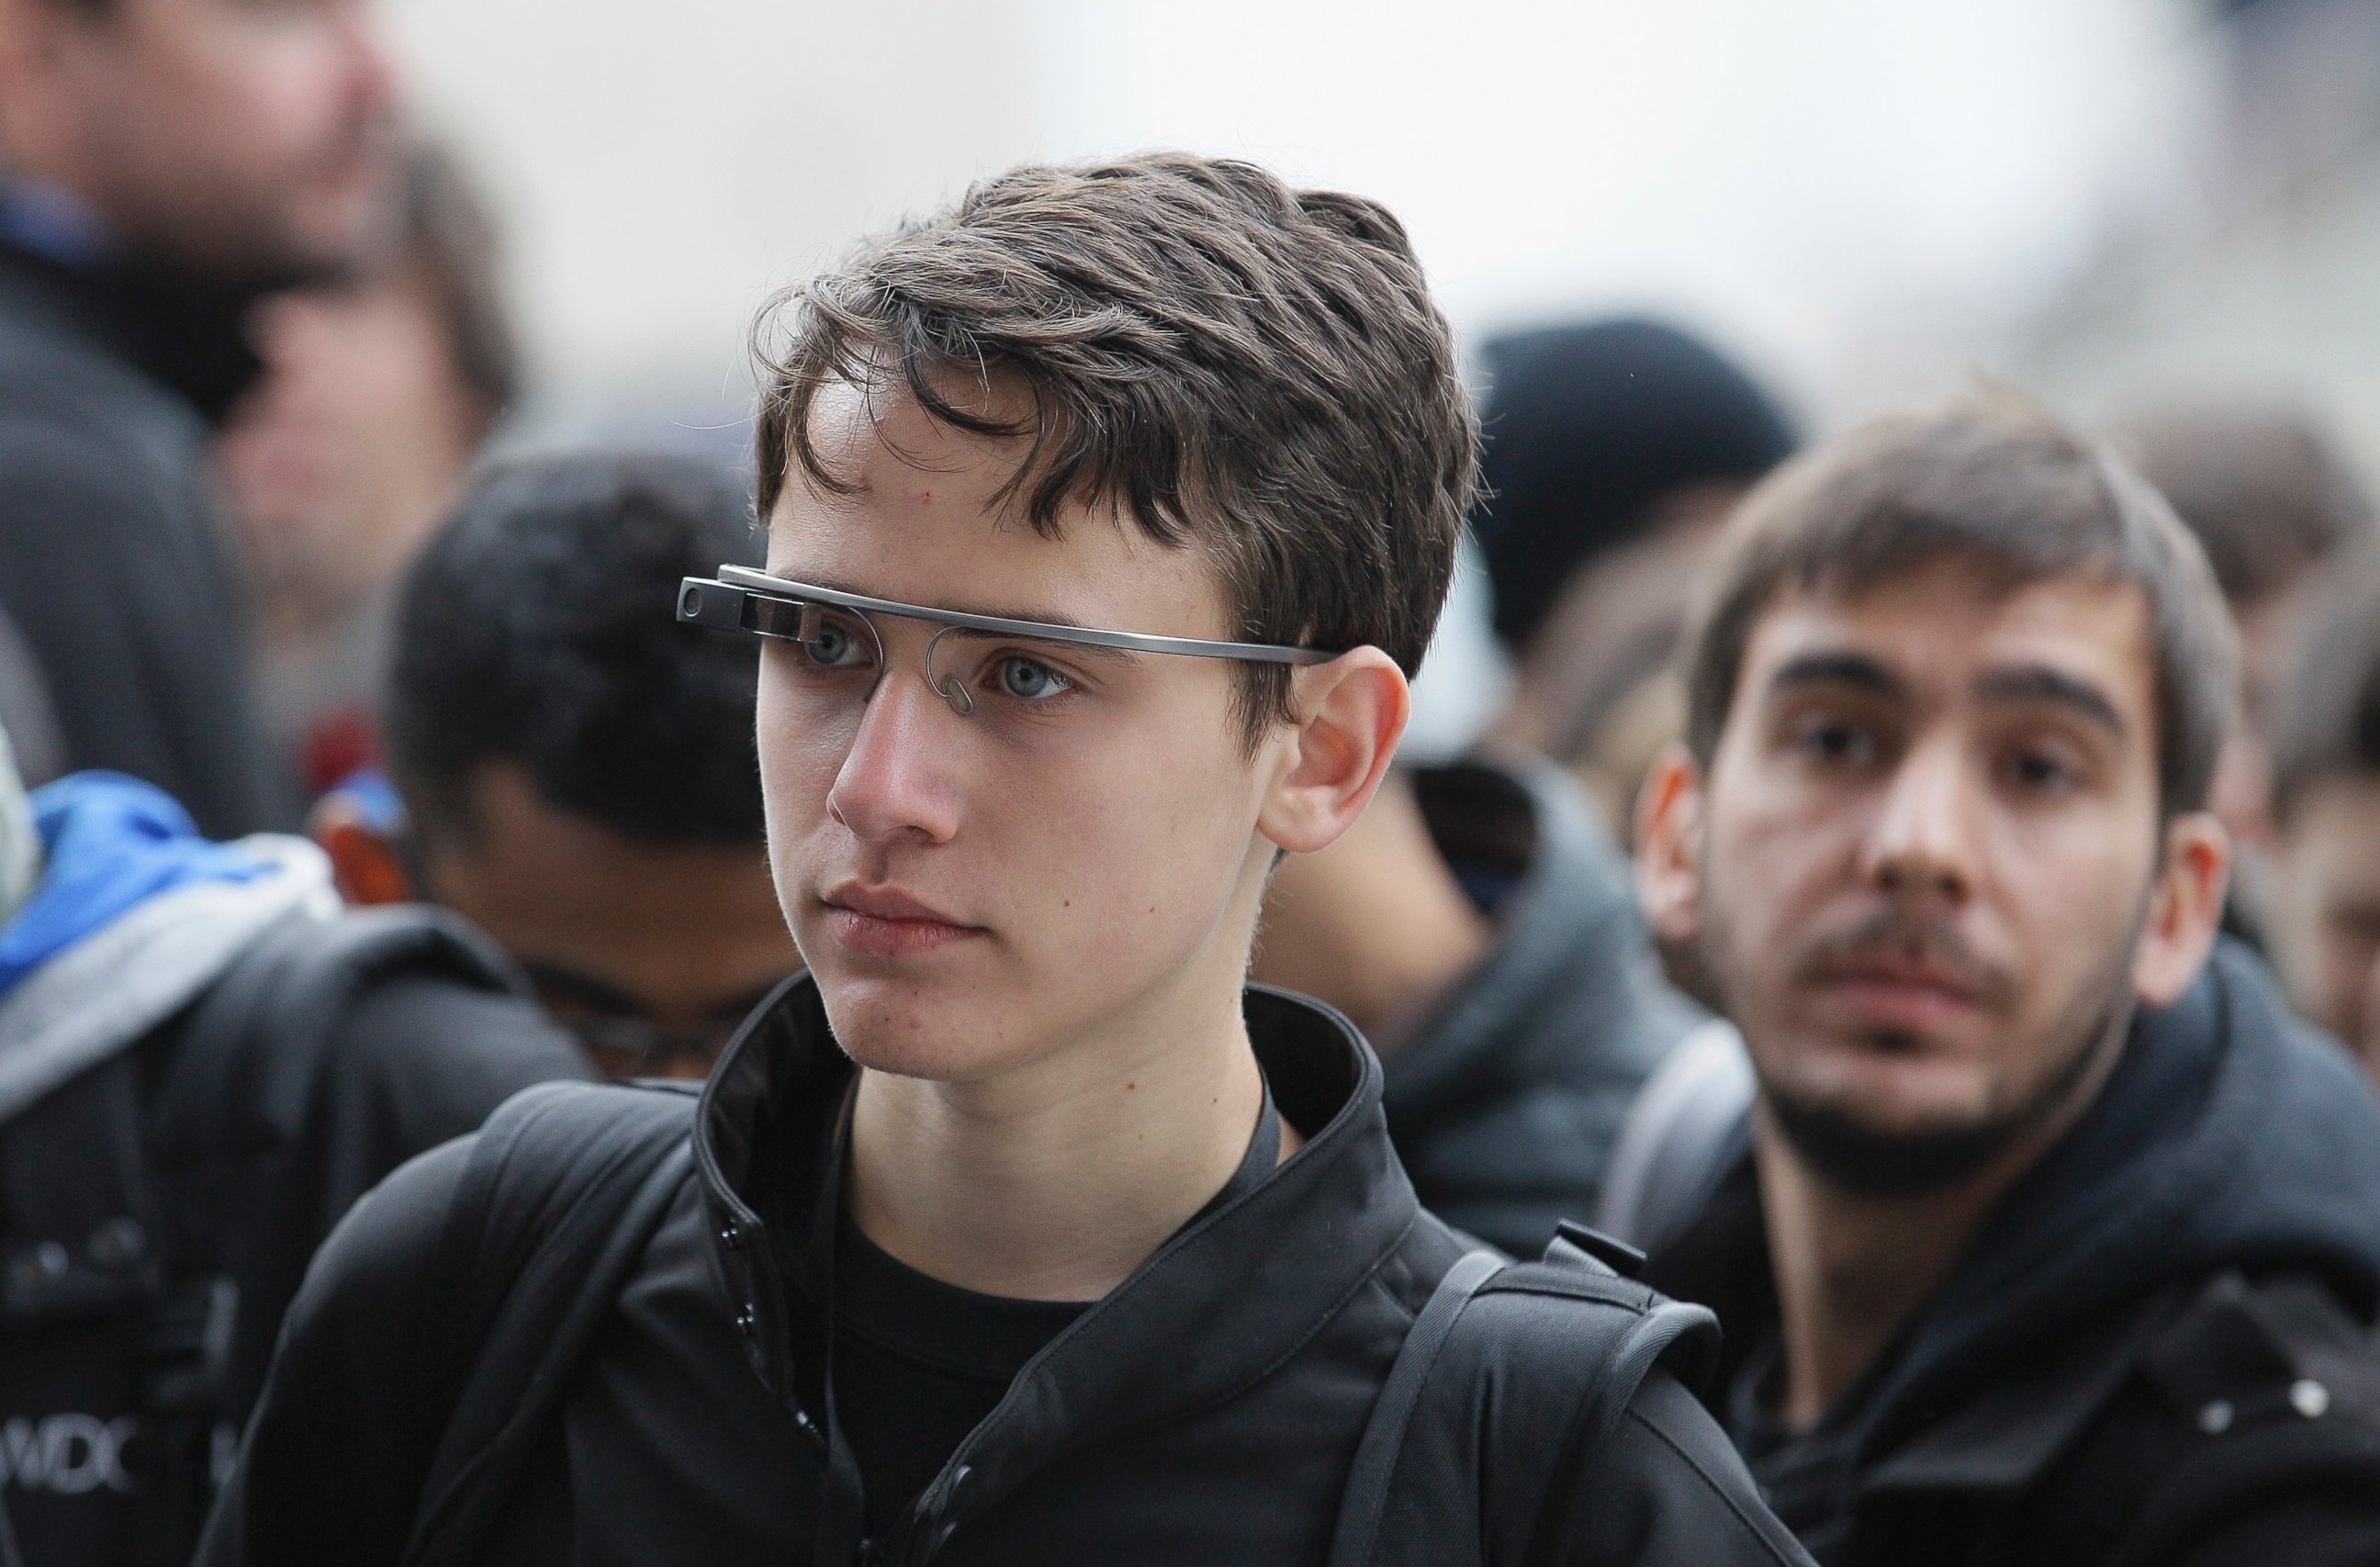 PHOTO: Attendees wear Google Glass at the Apple Worldwide Developers Conference in San Francisco on June 2, 2014. 